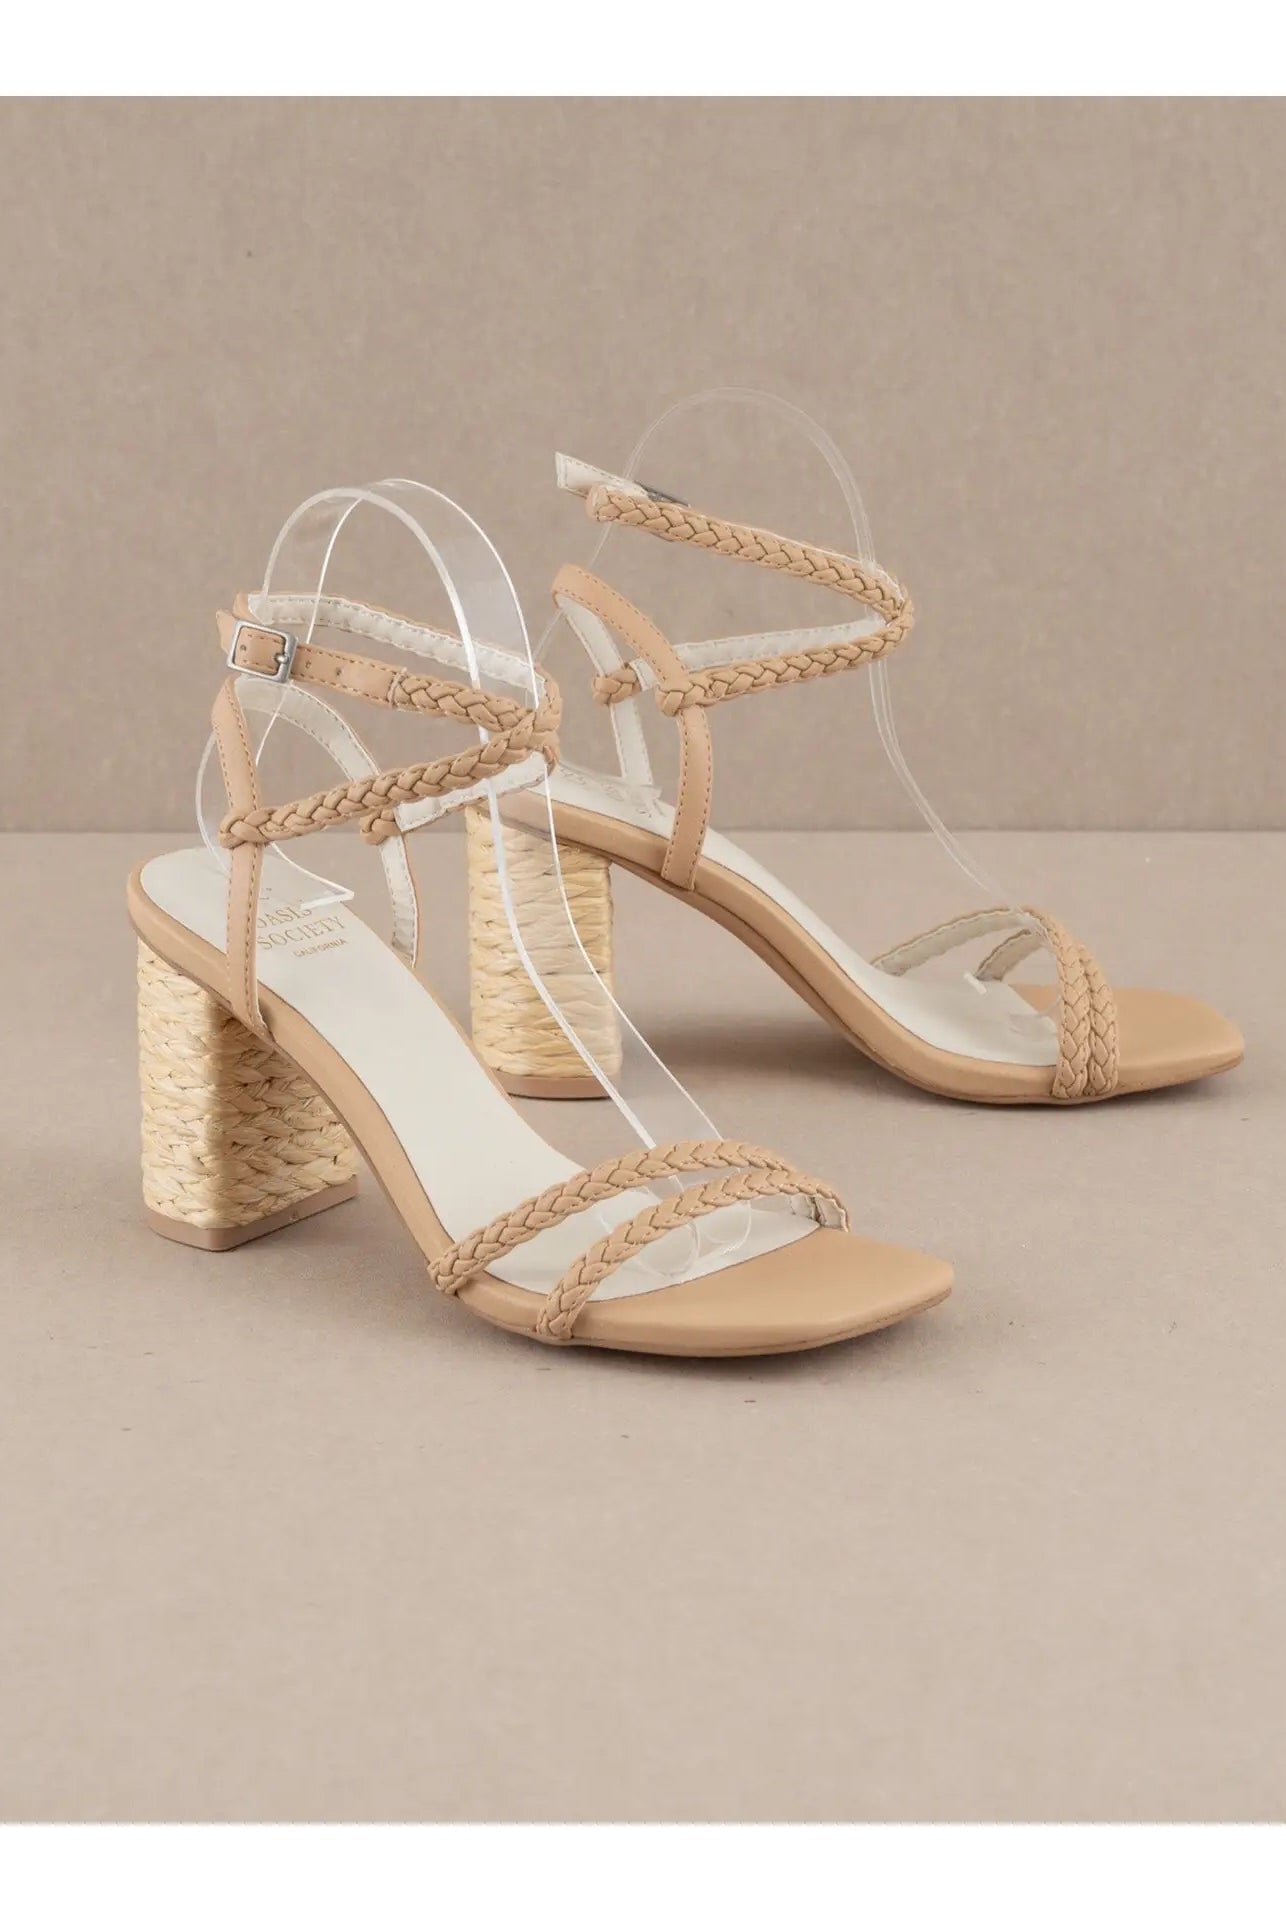 Naturally Neutral Sandal-270 Shoes-The Lovely Closet-The Lovely Closet, Women's Fashion Boutique in Alexandria, KY